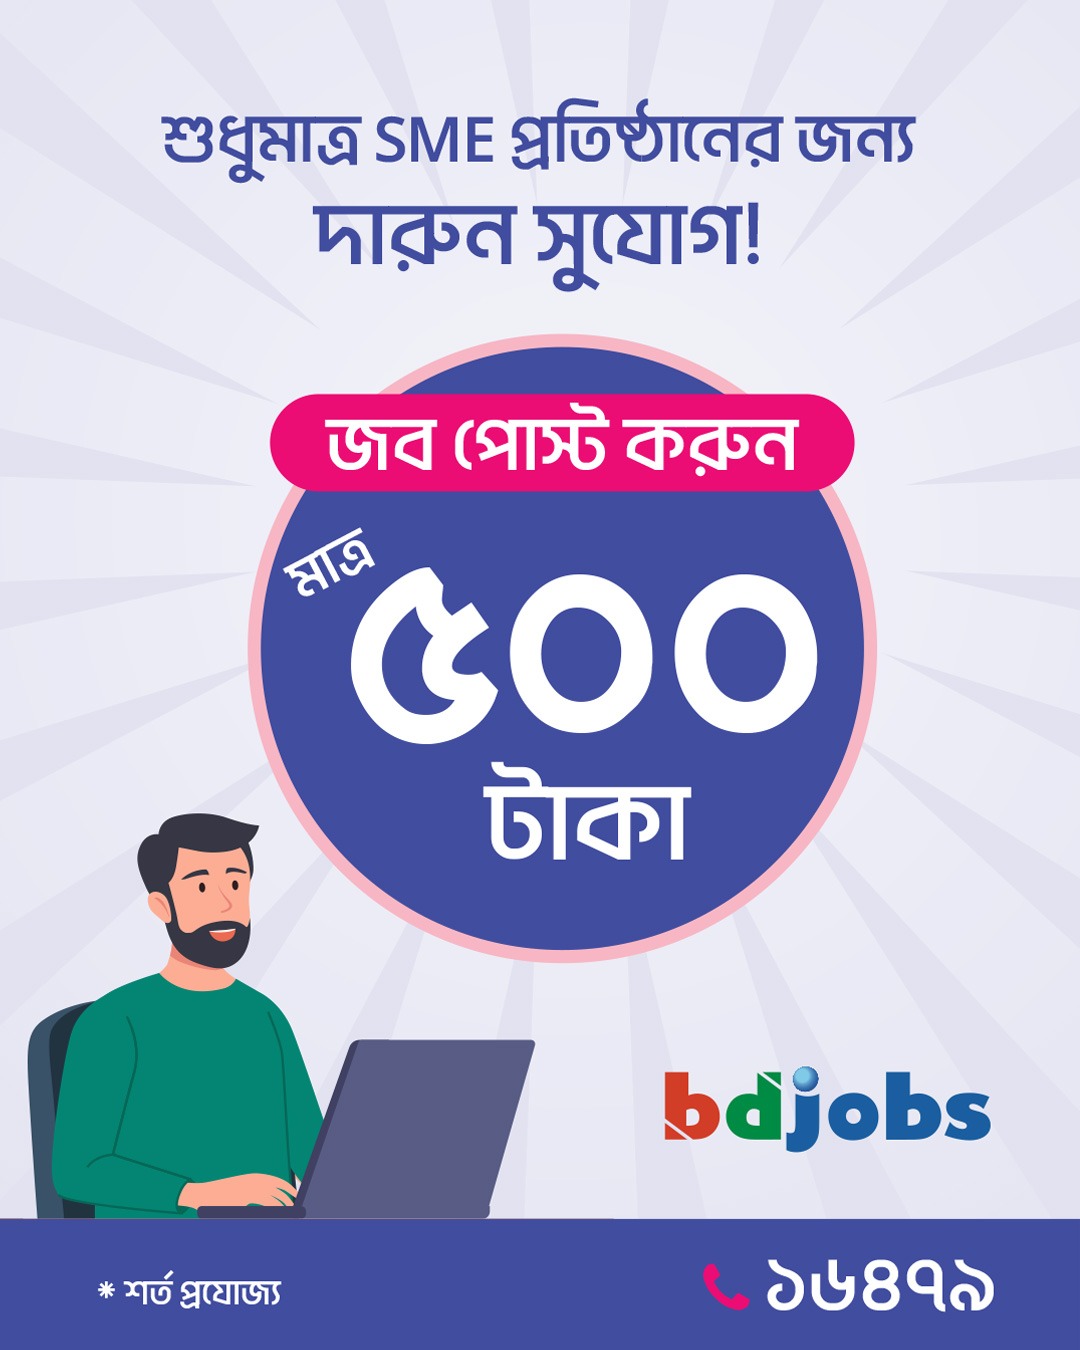 Bdjobs Launches Recruitment Solution for SMEs, Aims to Become Job Platform for Entire Economy